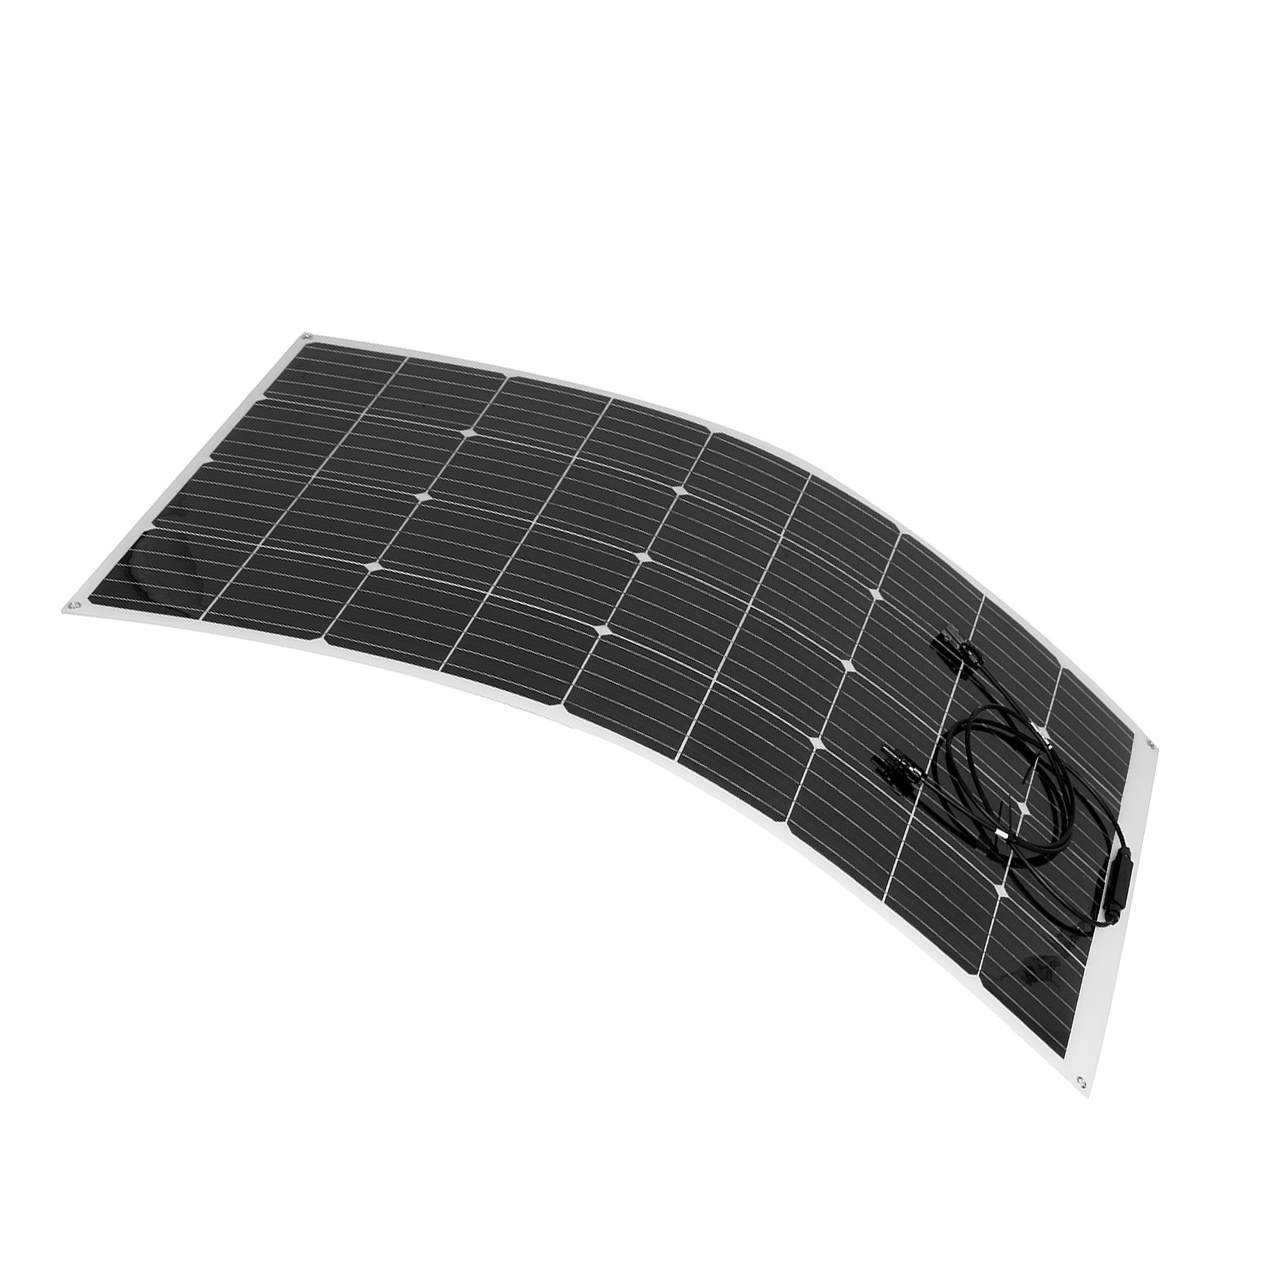 130W-18V-Highly-Flexible-Monocrystalline-Solar-Panel-Connector-Car-Boat-Camping-1664111-5